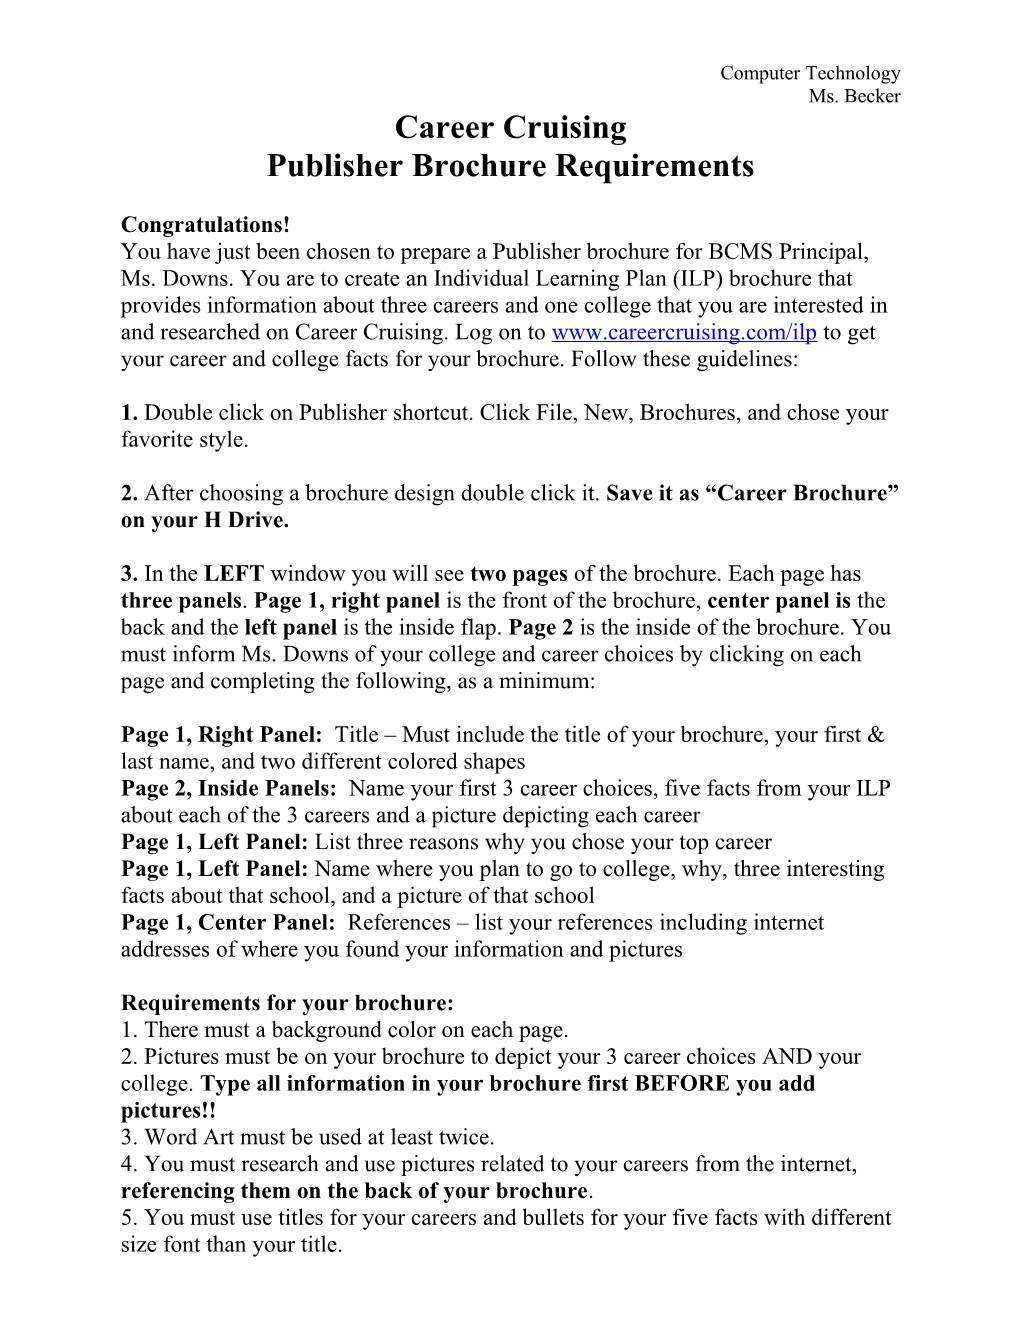 Publisher Brochure Requirements